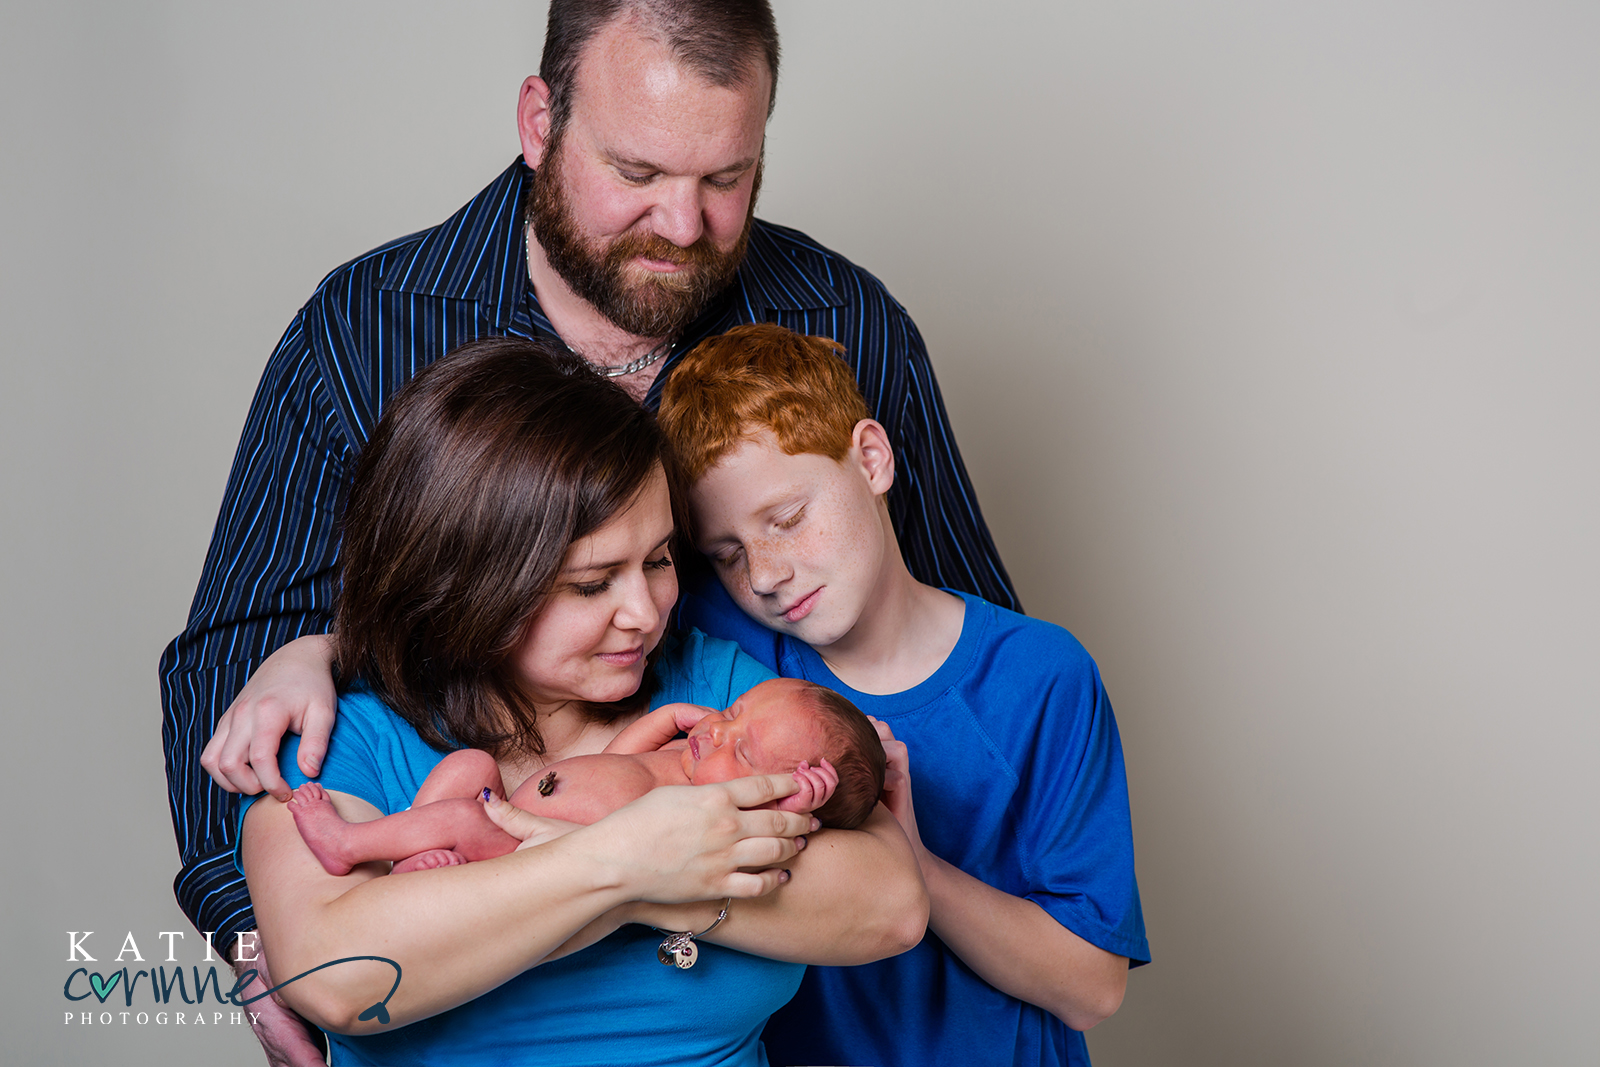 siblings with baby, sibling family portrait, baby sibling portrait, baby siblings photo, big brother baby photos, big brother with newborn baby